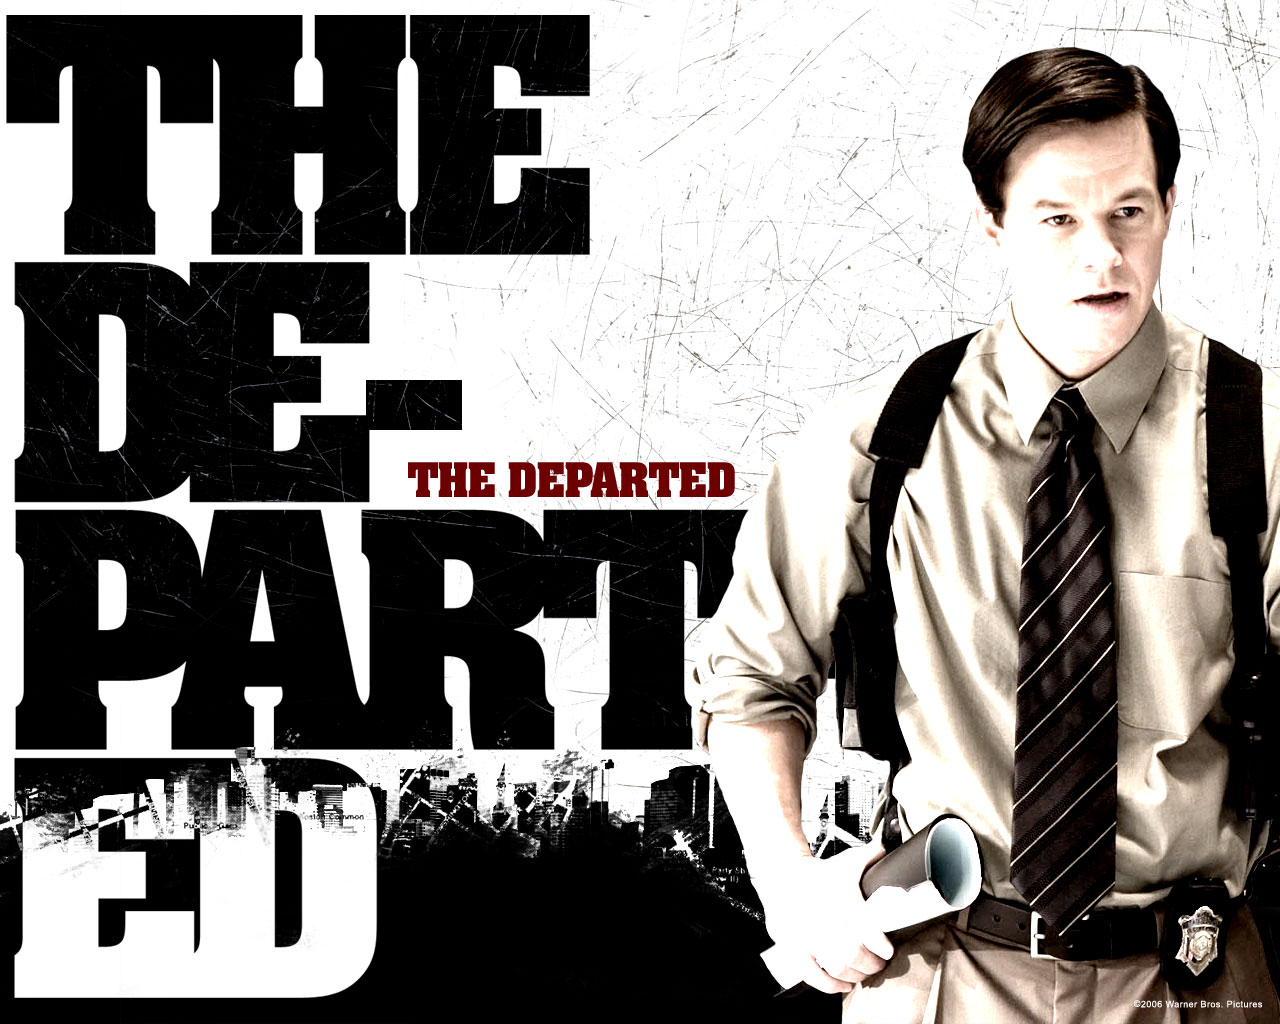 The Departed - Poster Of The Departed 2006 - 1280x1024 Wallpaper 